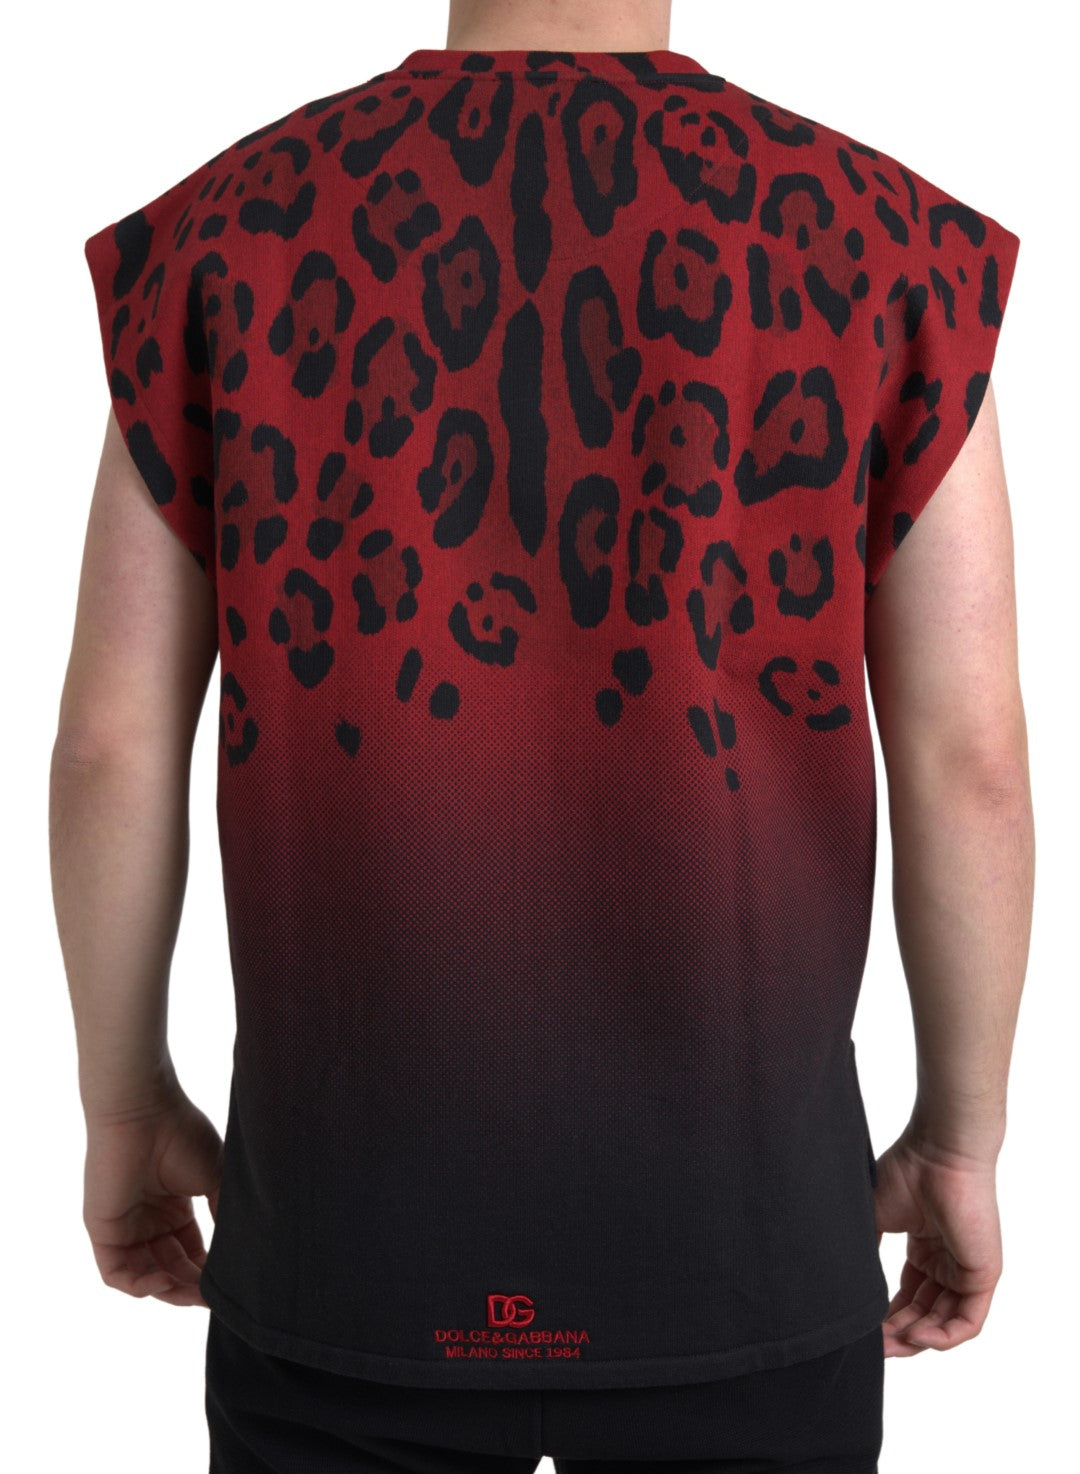 Red Leopard Print Cotton Tank Top